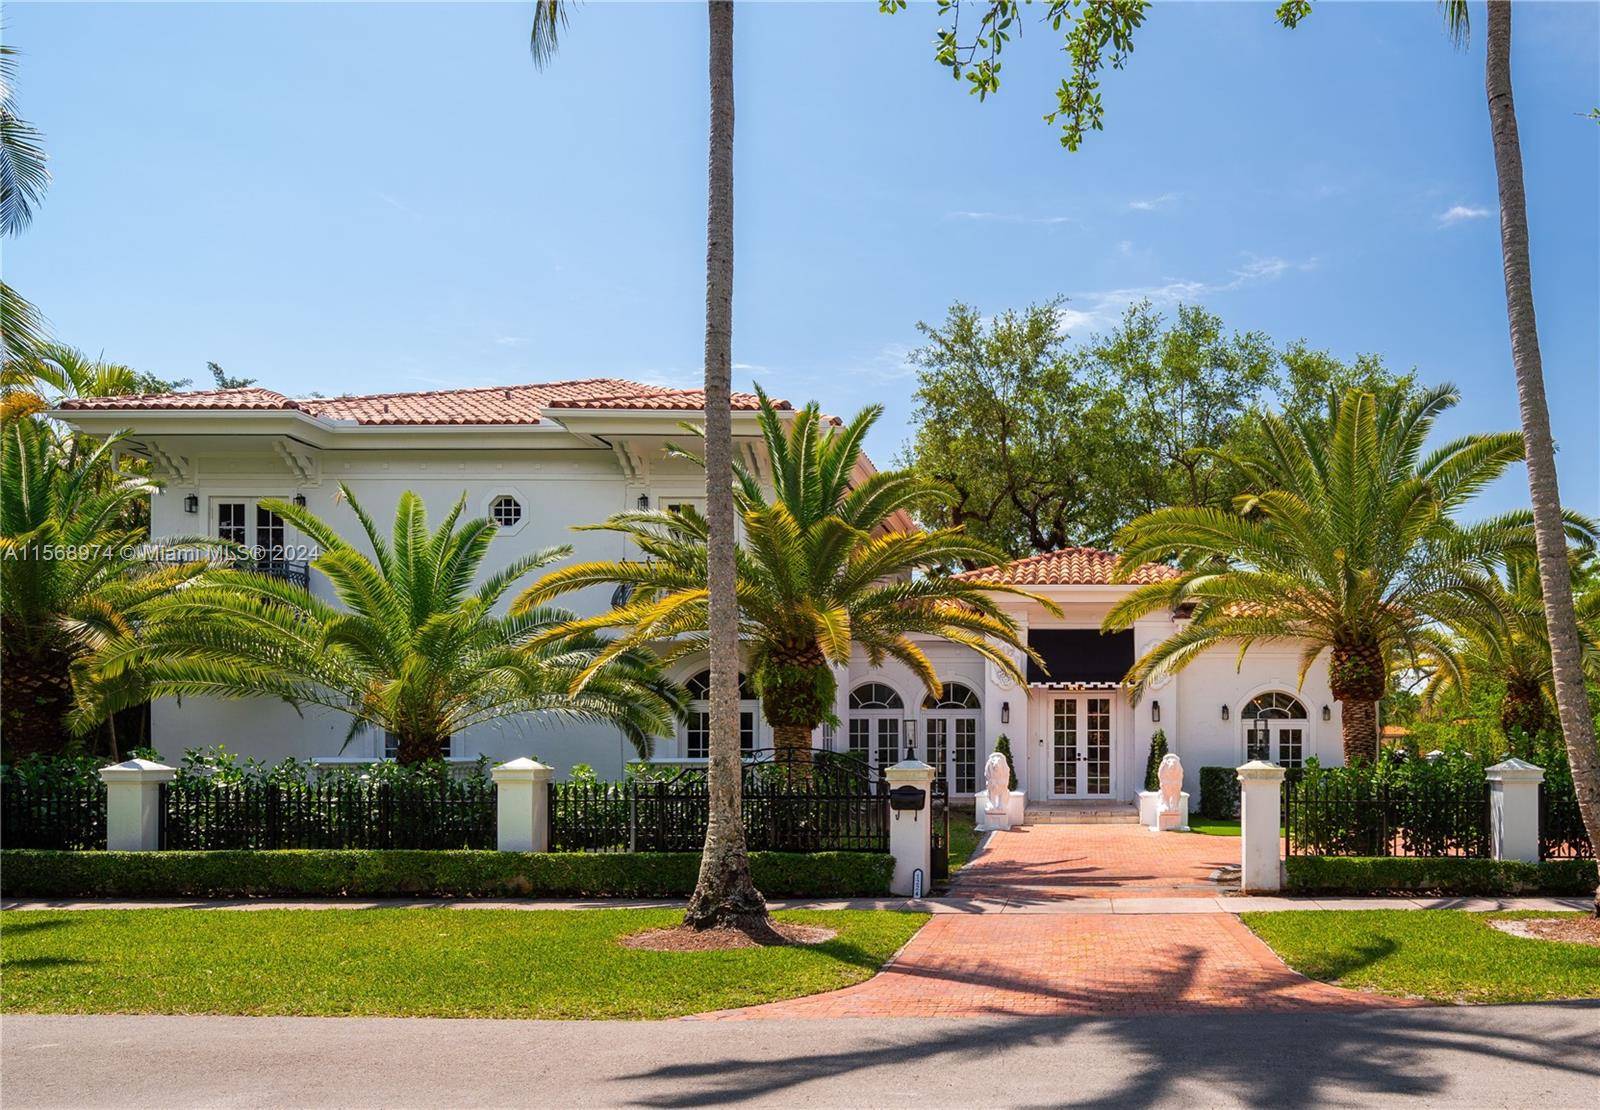 Palm Beach elegance renovated with youthful, exuberant styling by renowned and televised designer known for her projects in South Hamptons, Beverly Hills and Palm Beach.